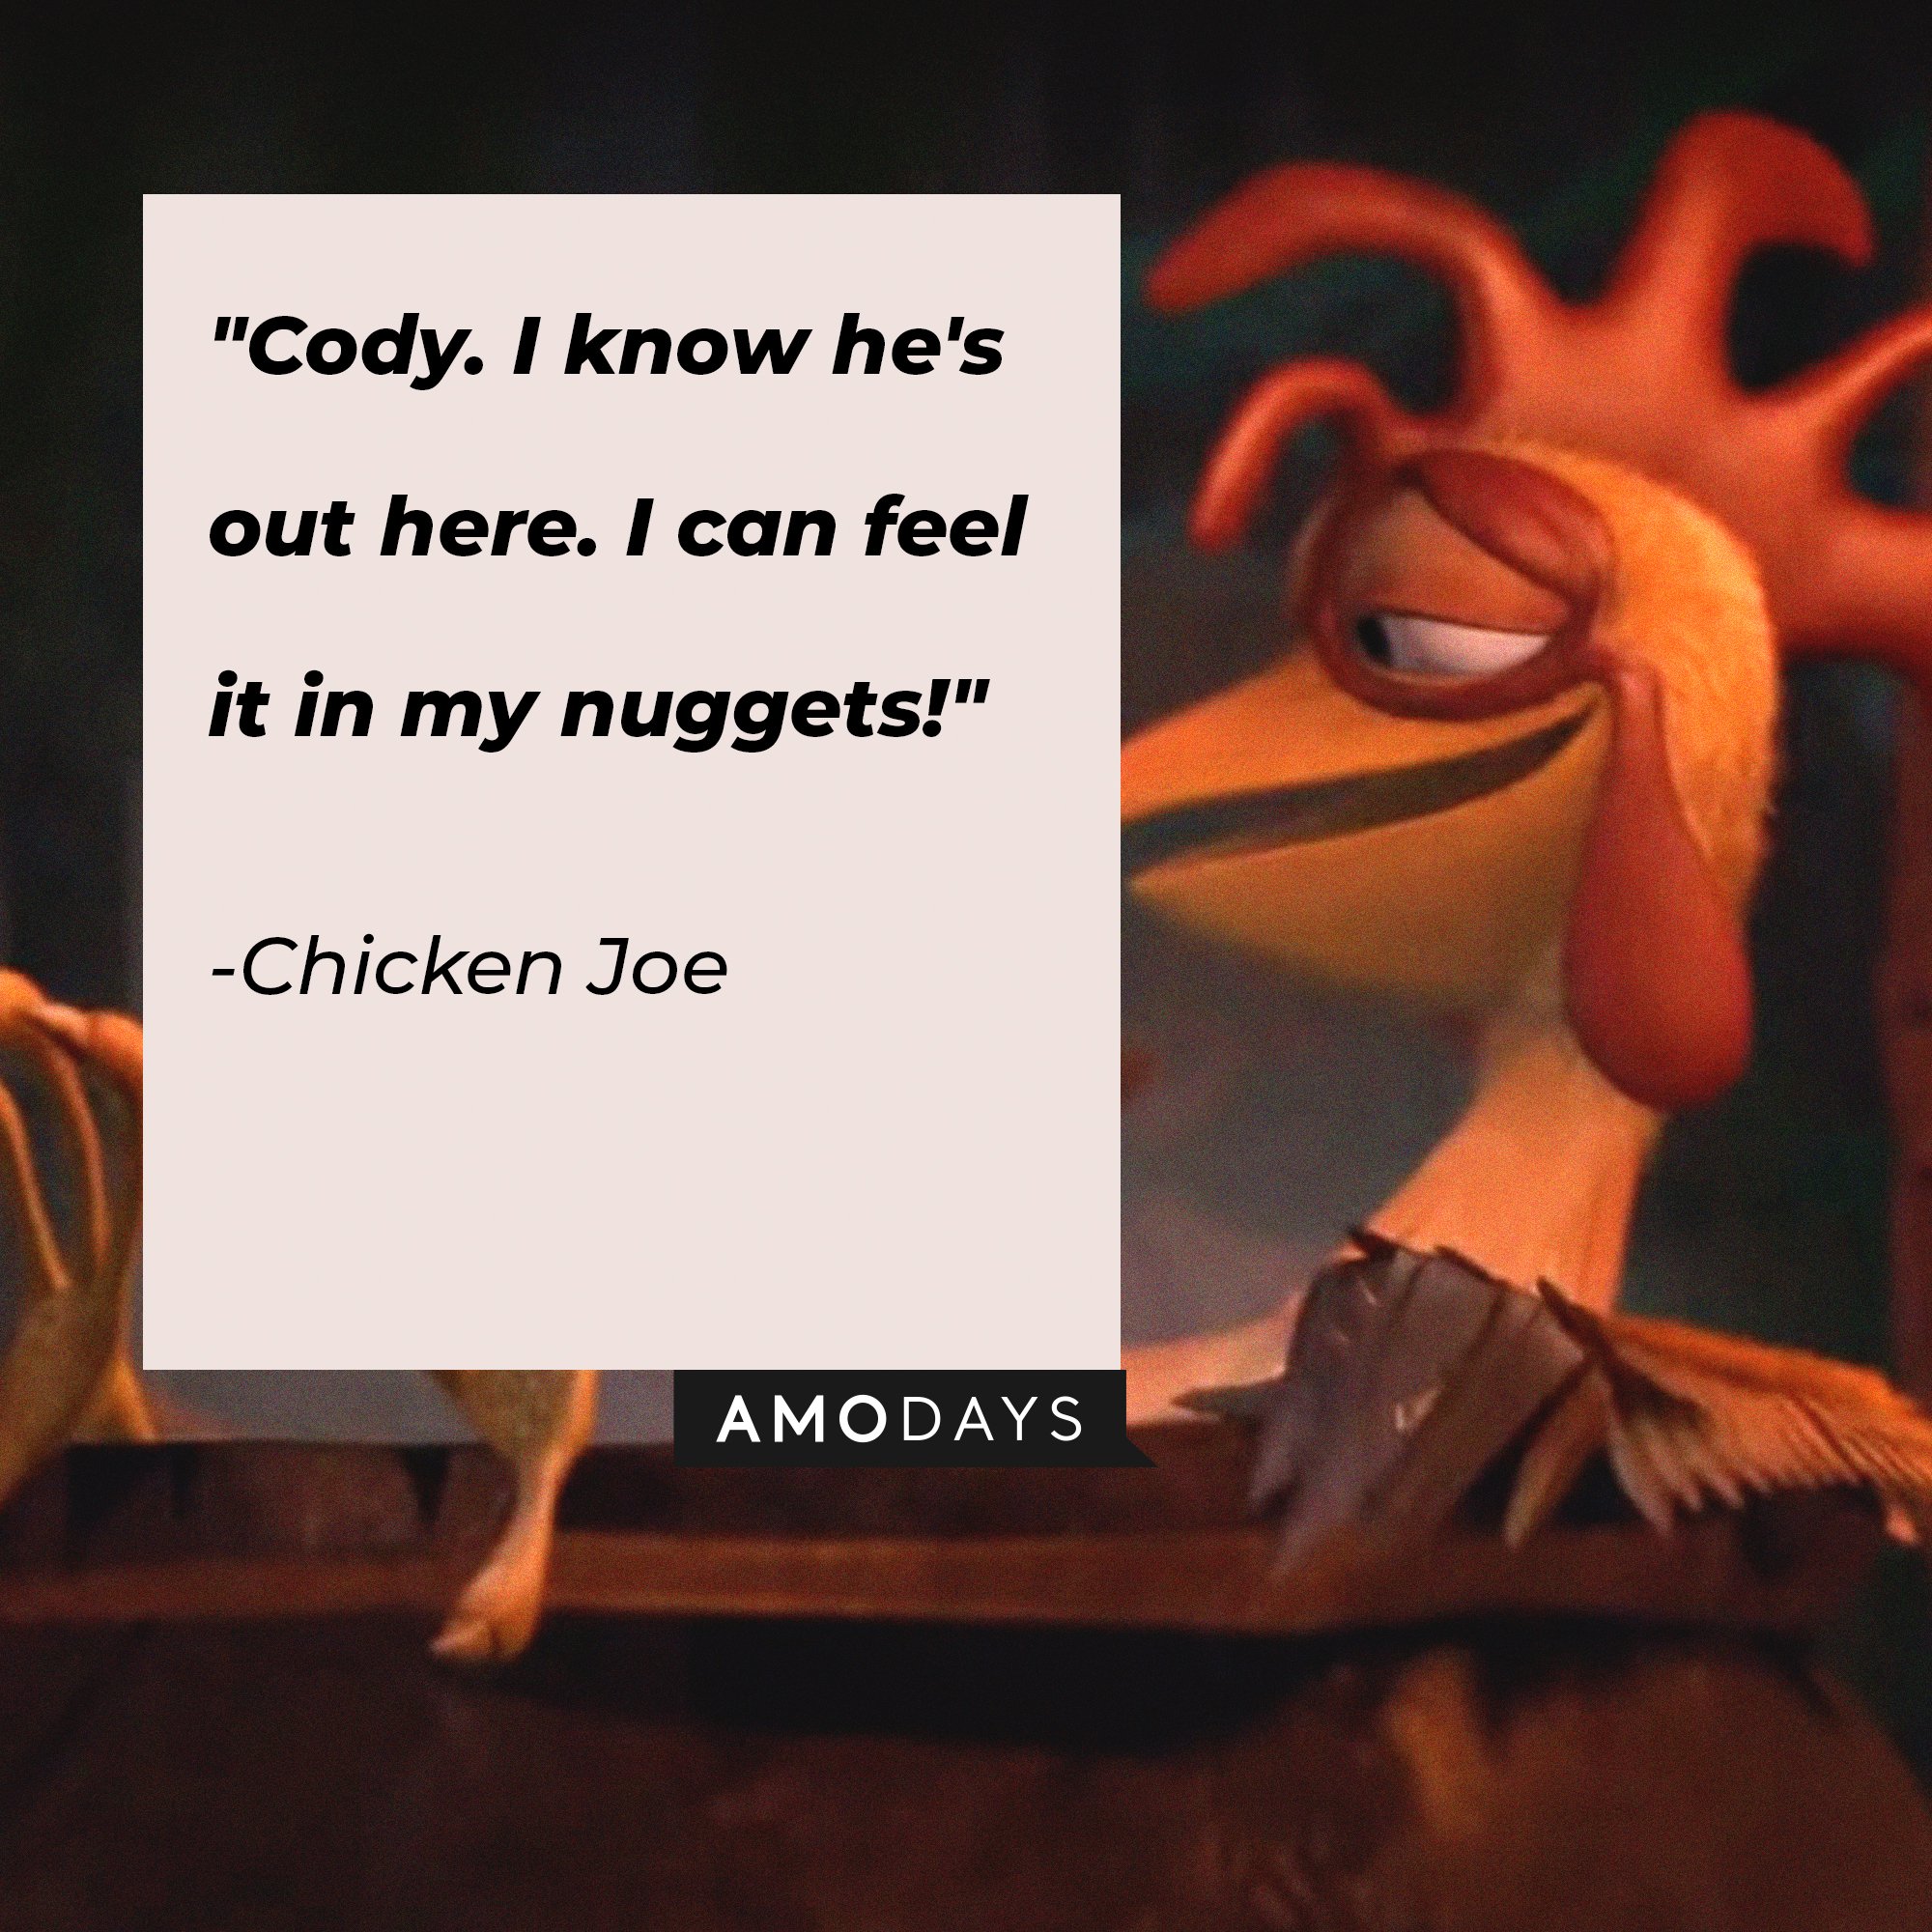 Chicken Joe's quote: "Cody. I know he's out here. I can feel it in my nuggets!" | Image: AmoDays